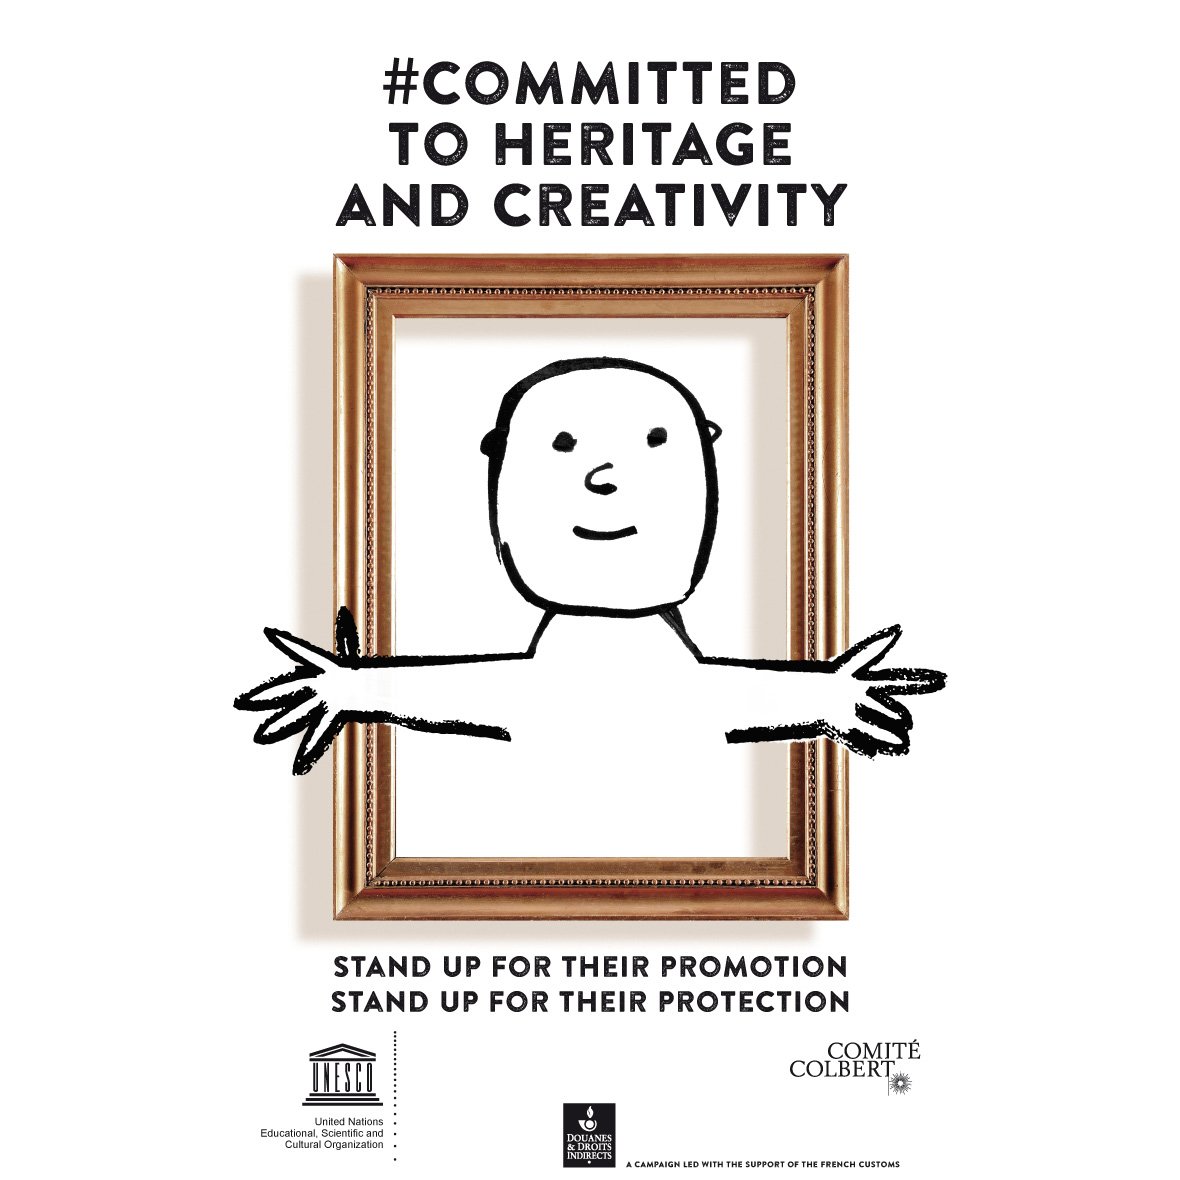 The LVMH Group joins #UNESCO and #ComitéColbert to defend #heritageandcreativity